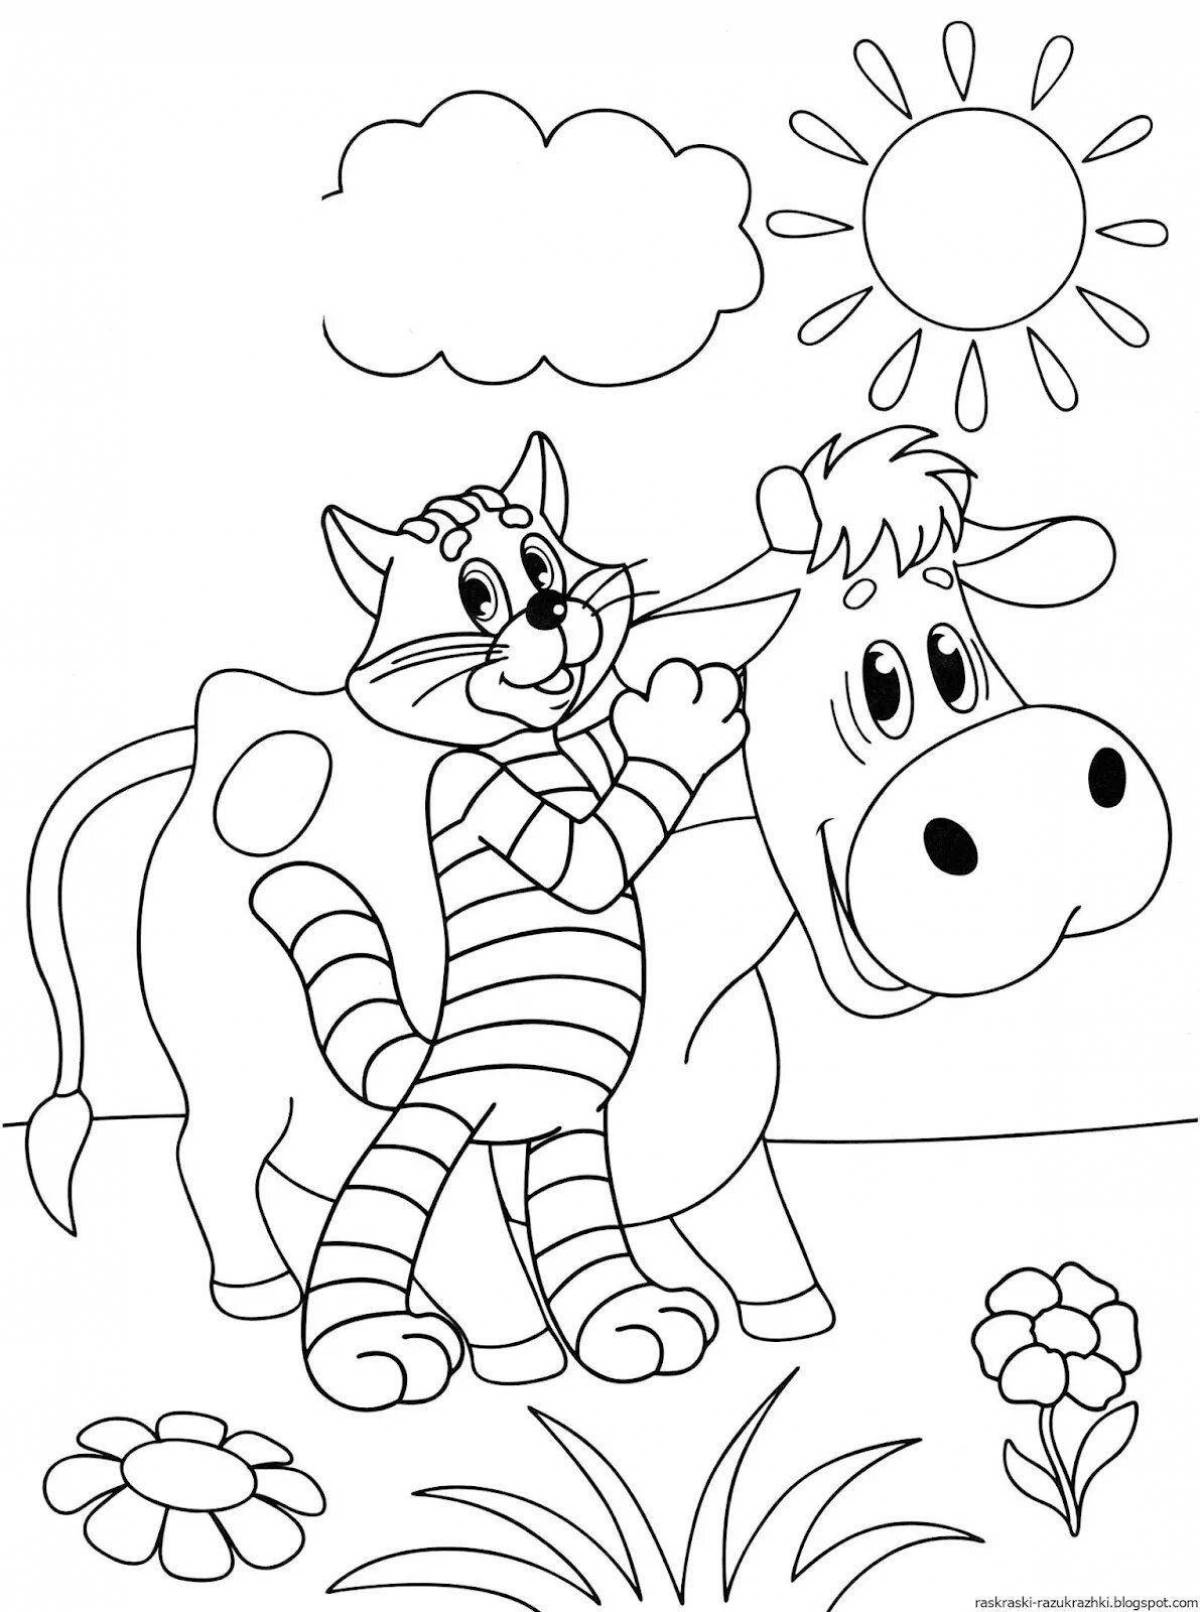 Fun cartoon coloring for 3 year olds